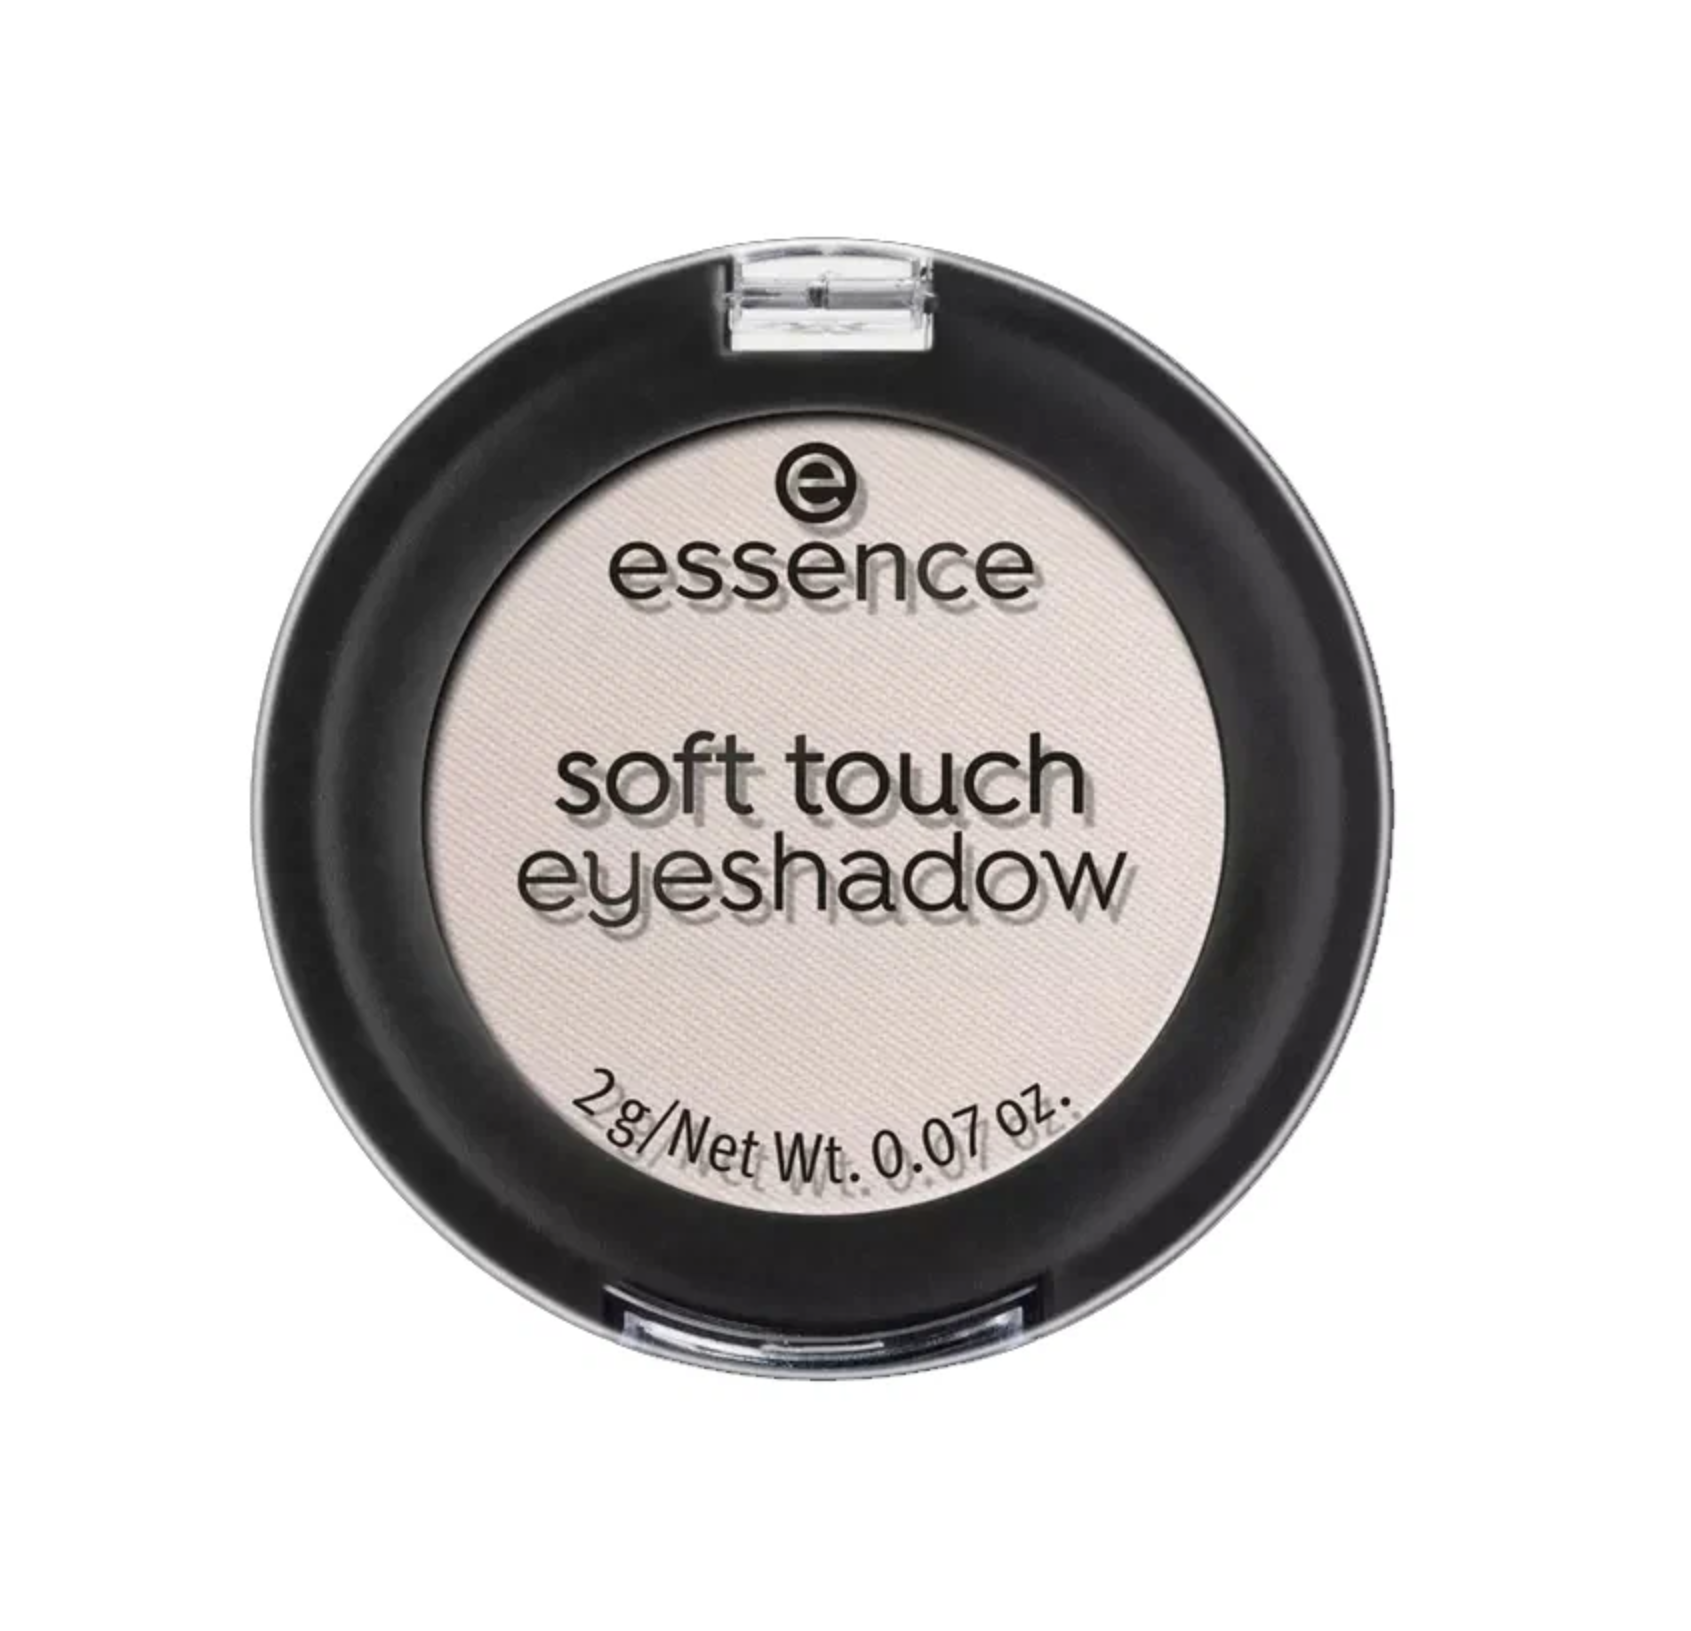   / Essence -    Soft Touch eyeshadow 01 The one 2 